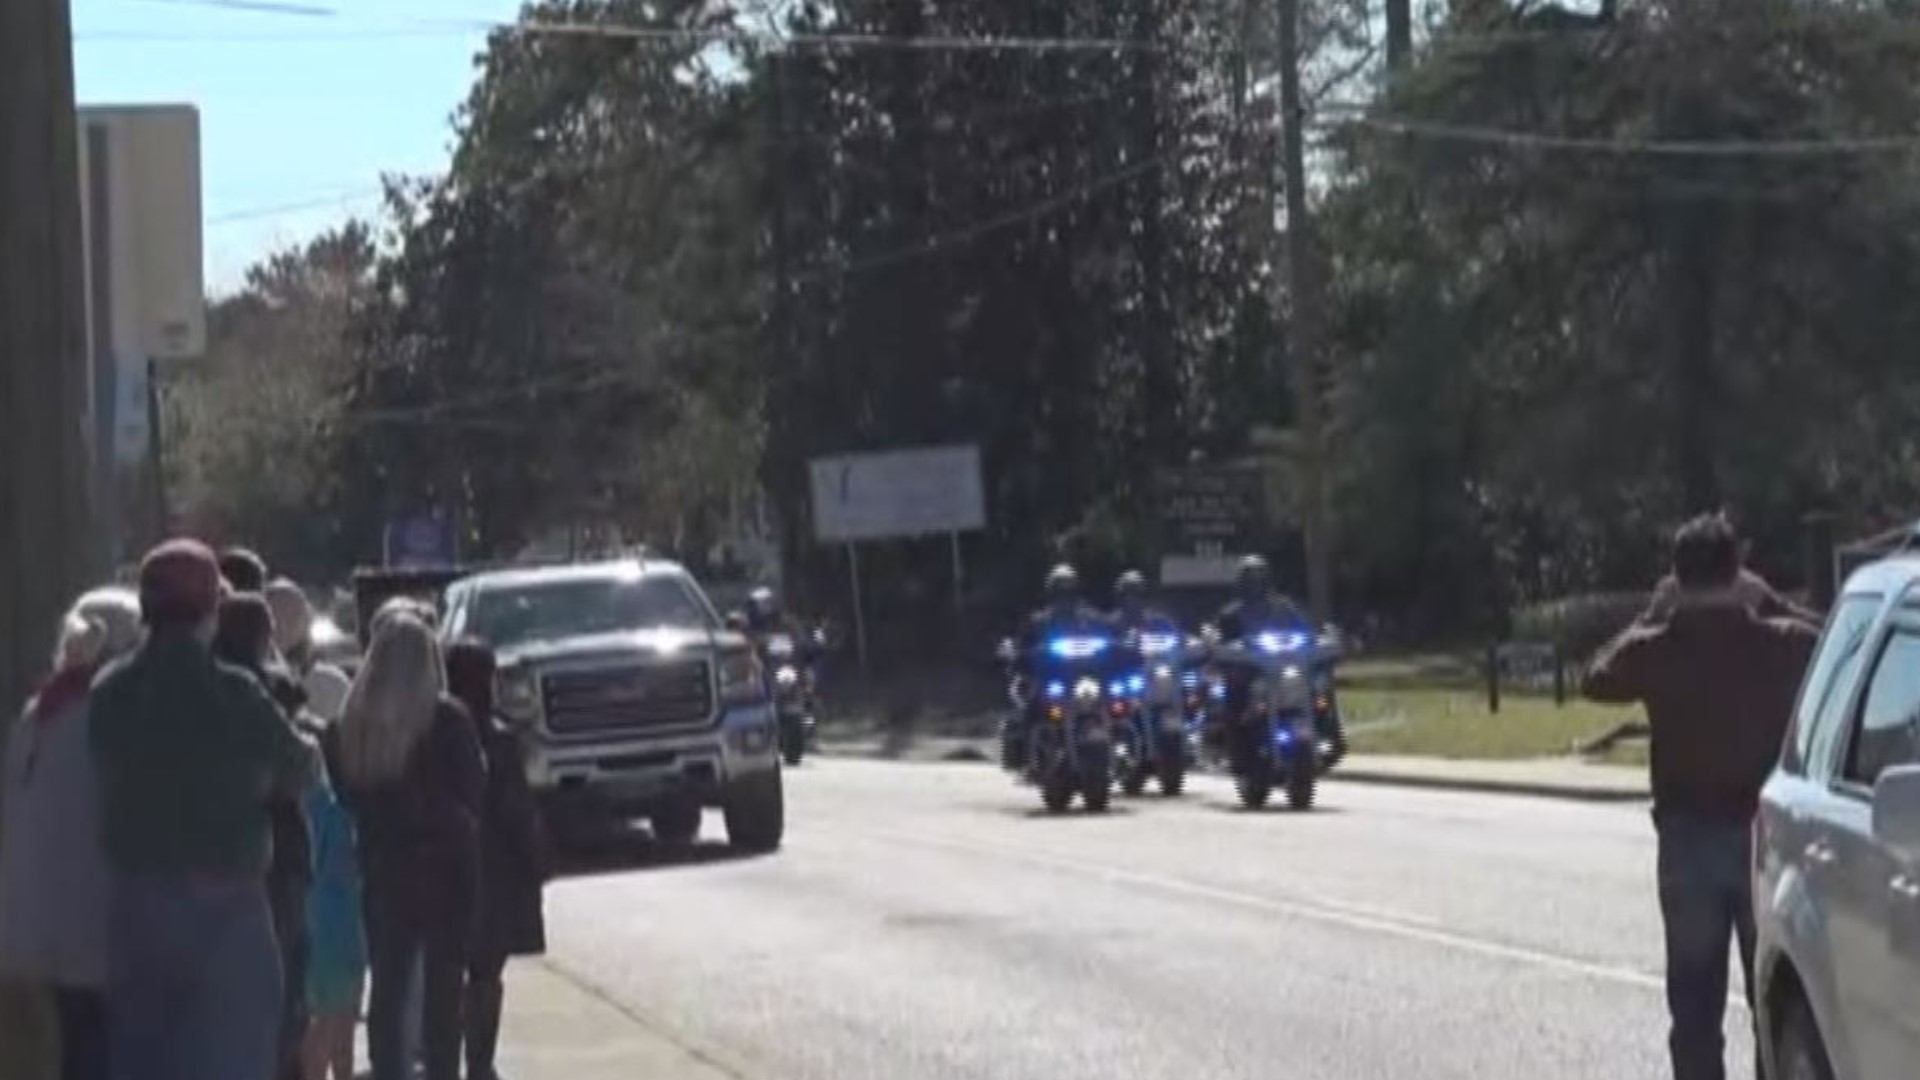 A police motorcade brought the body of Faye Swetlik home to Lexington County after her autopsy in Charleston on February 15, 2020.